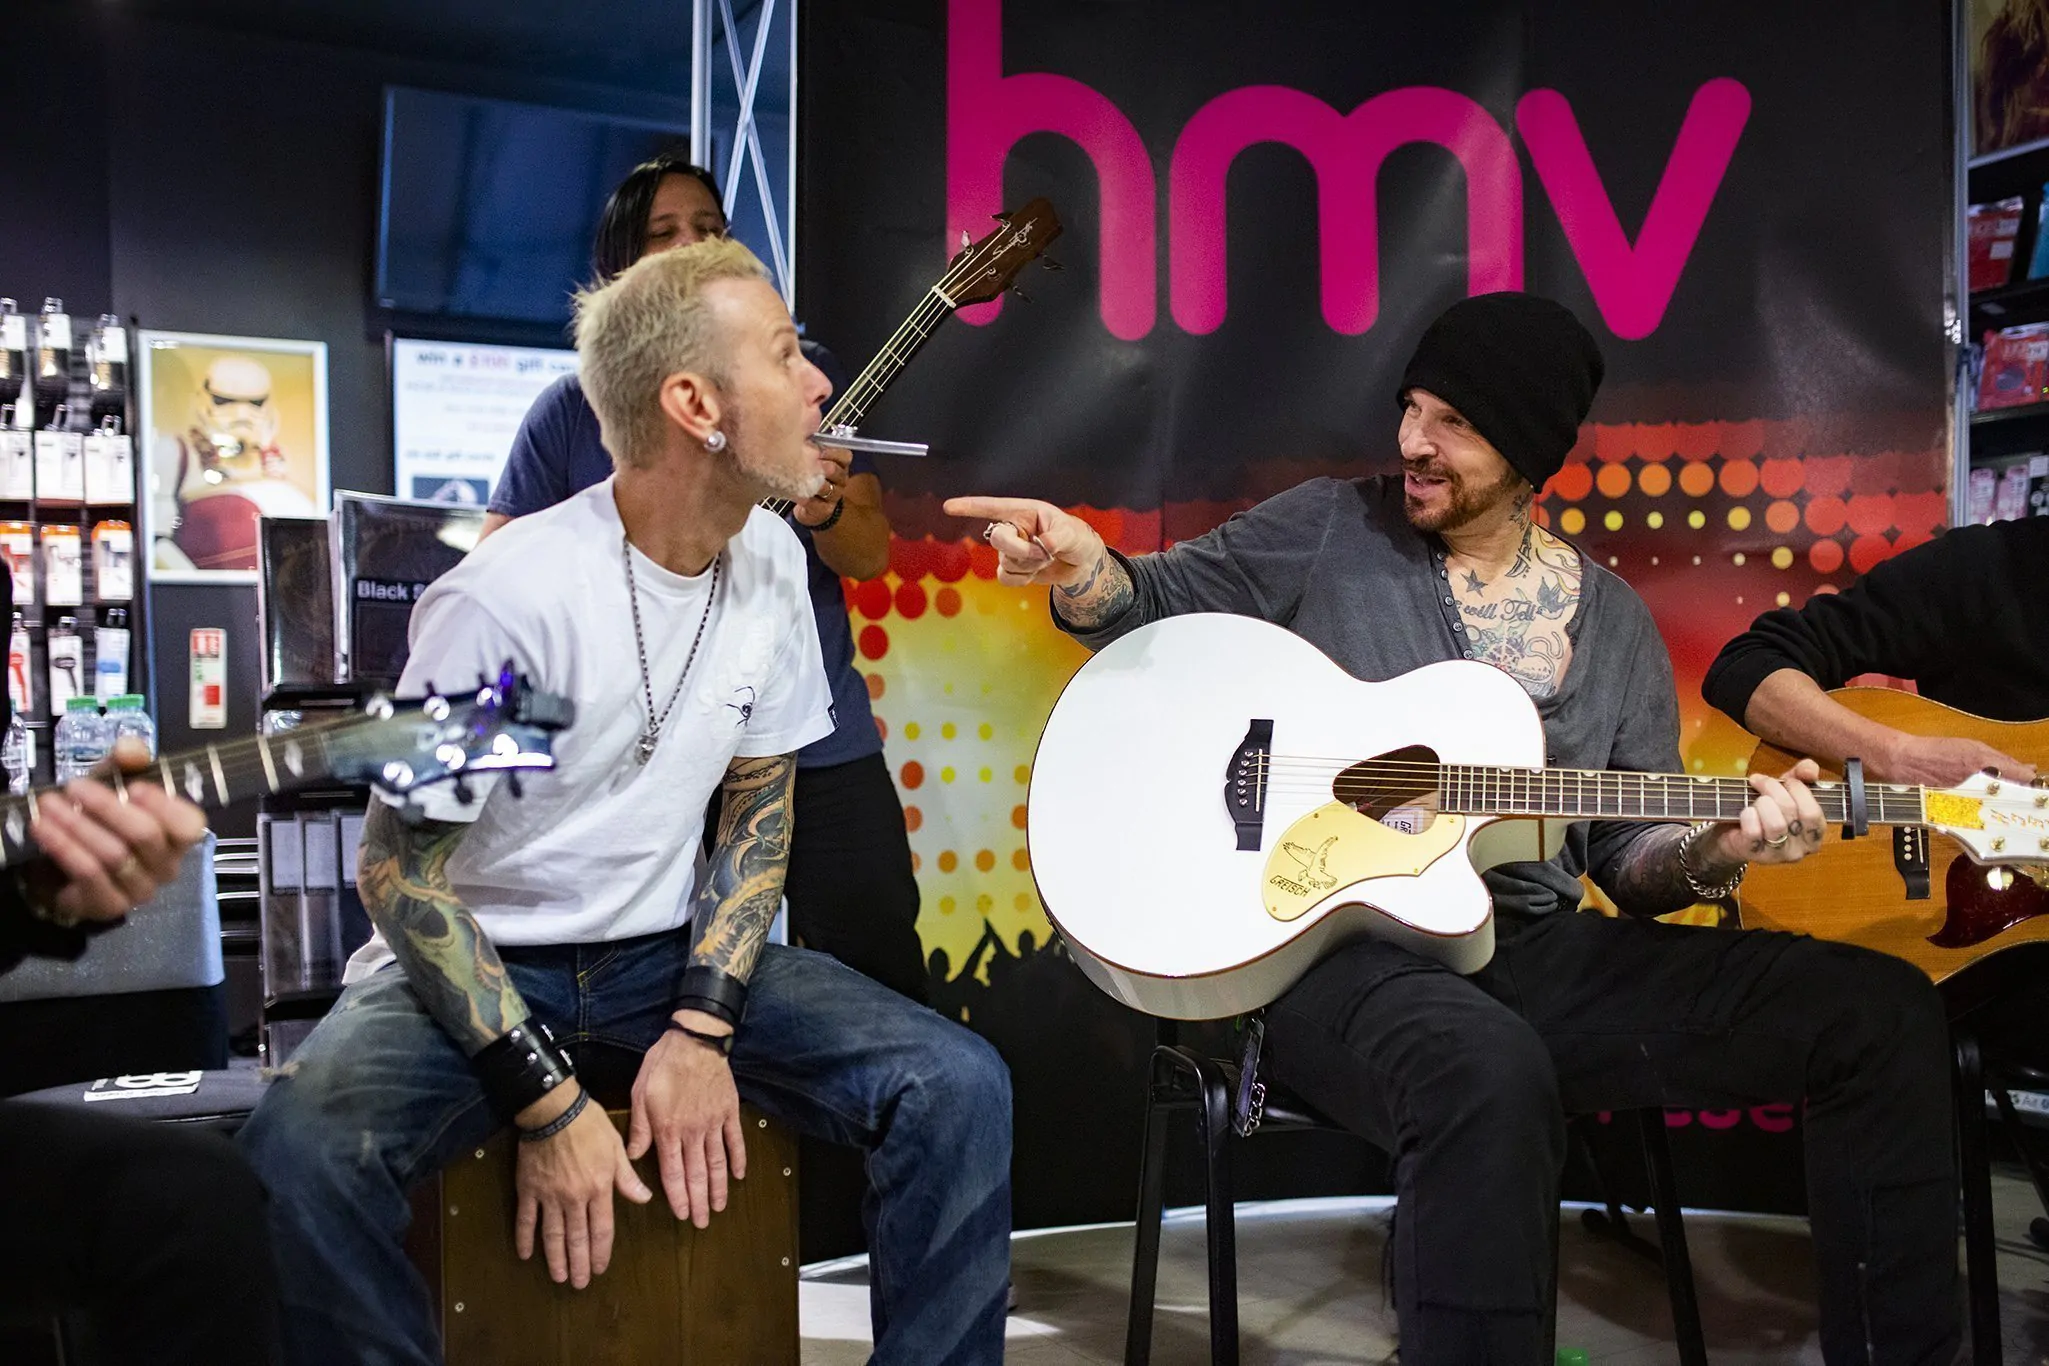 IN FOCUS// Black Star Riders – Live Acoustic Set and Signing – HMV Belfast